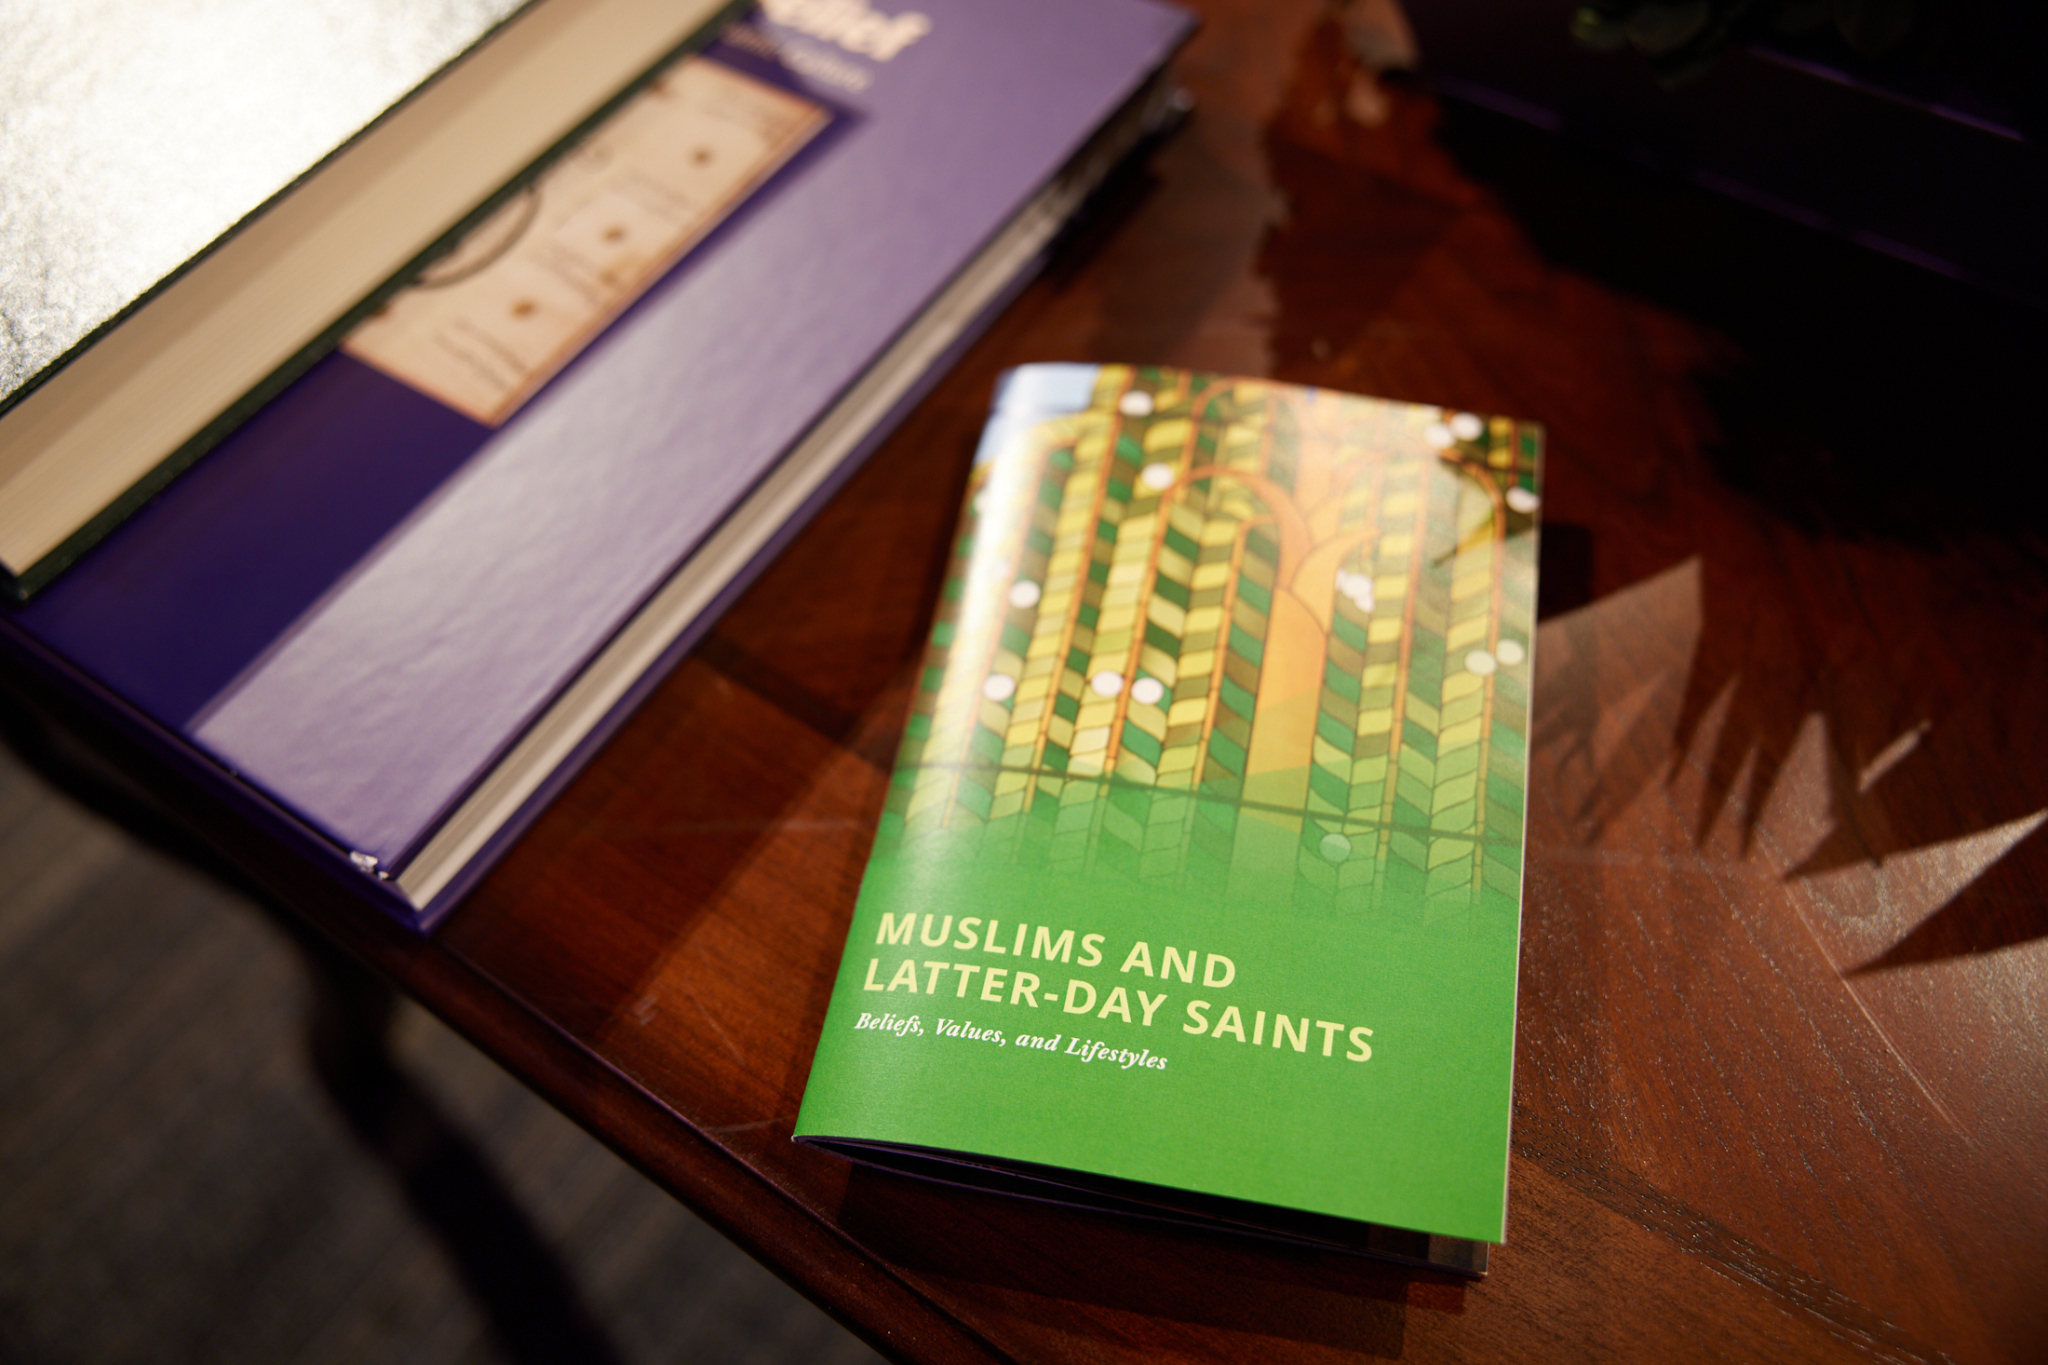 A copy of the new pamphlet “Muslims and Latter-day Saints: Beliefs, Values and Lifestyles,” released on Jan. 19, 2022.